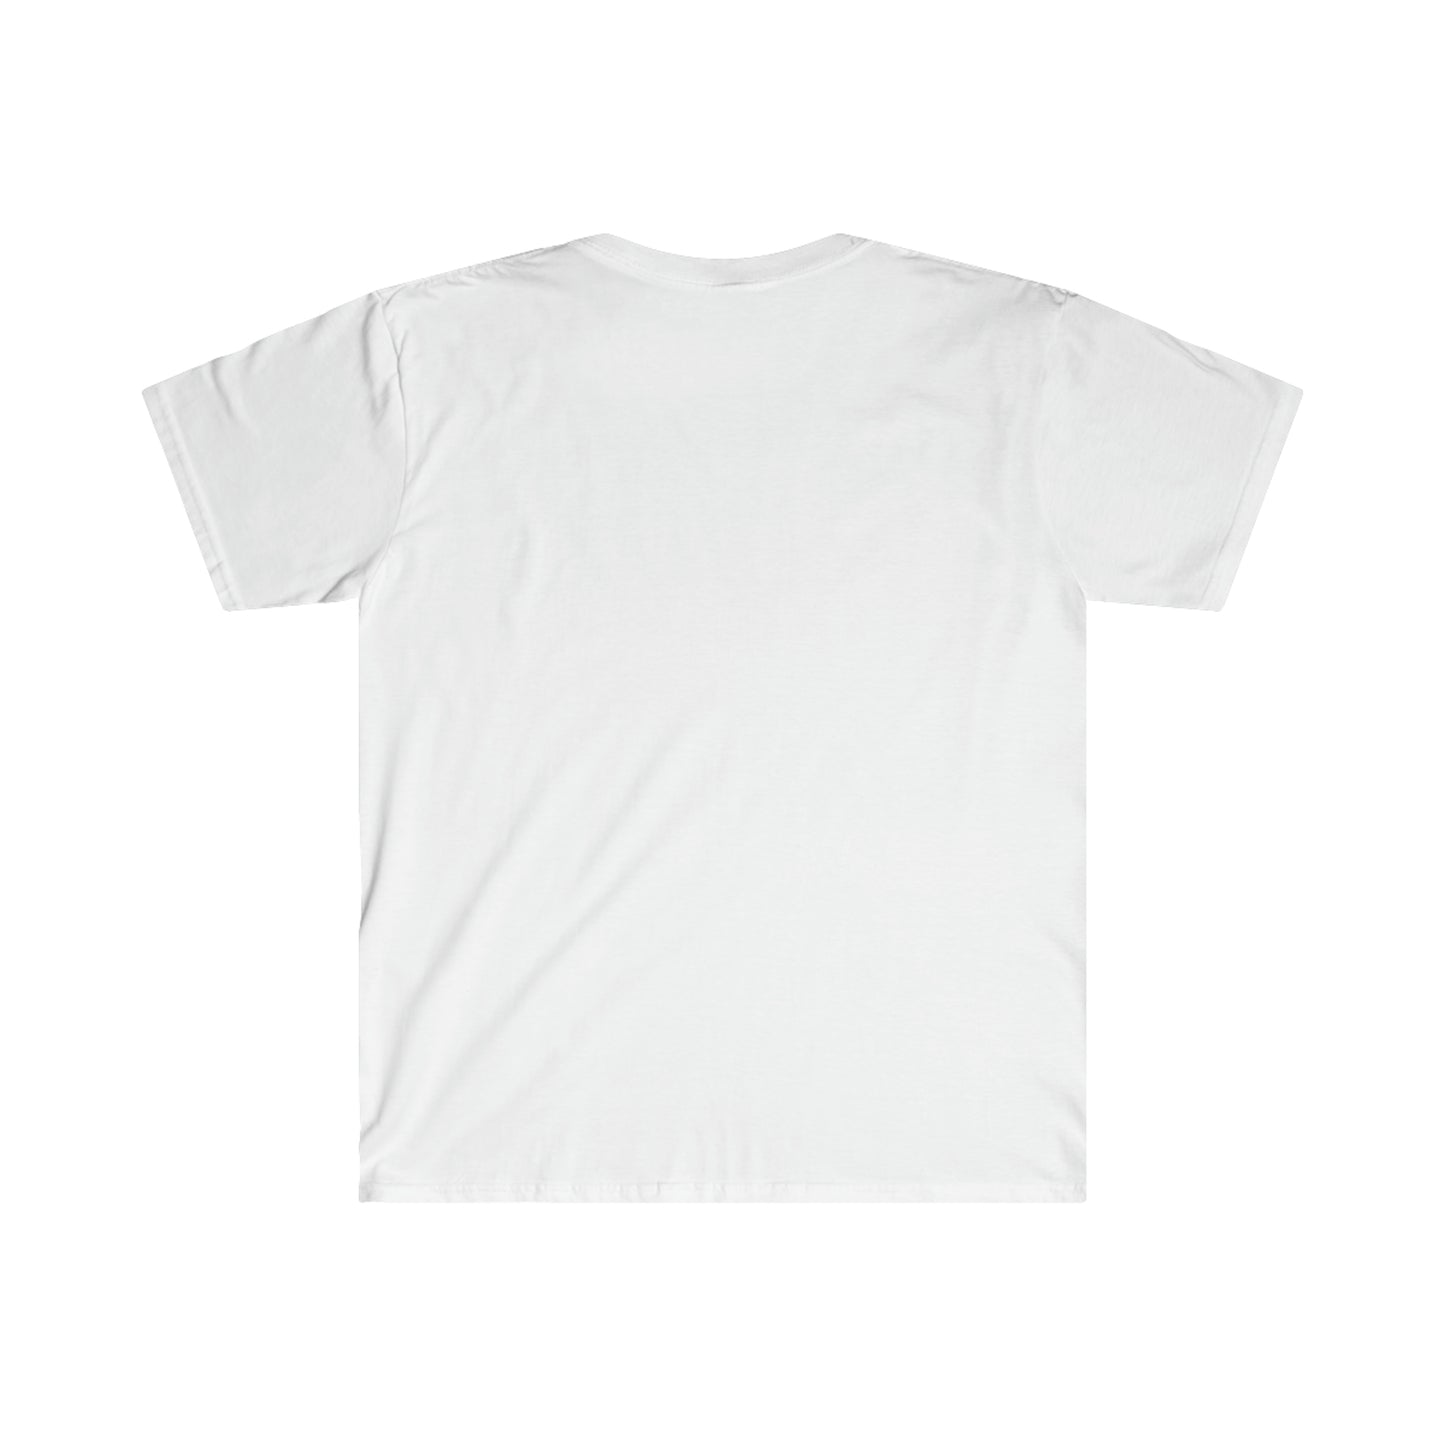 Smooth Rock Falls - Men's Softstyle T-Shirt